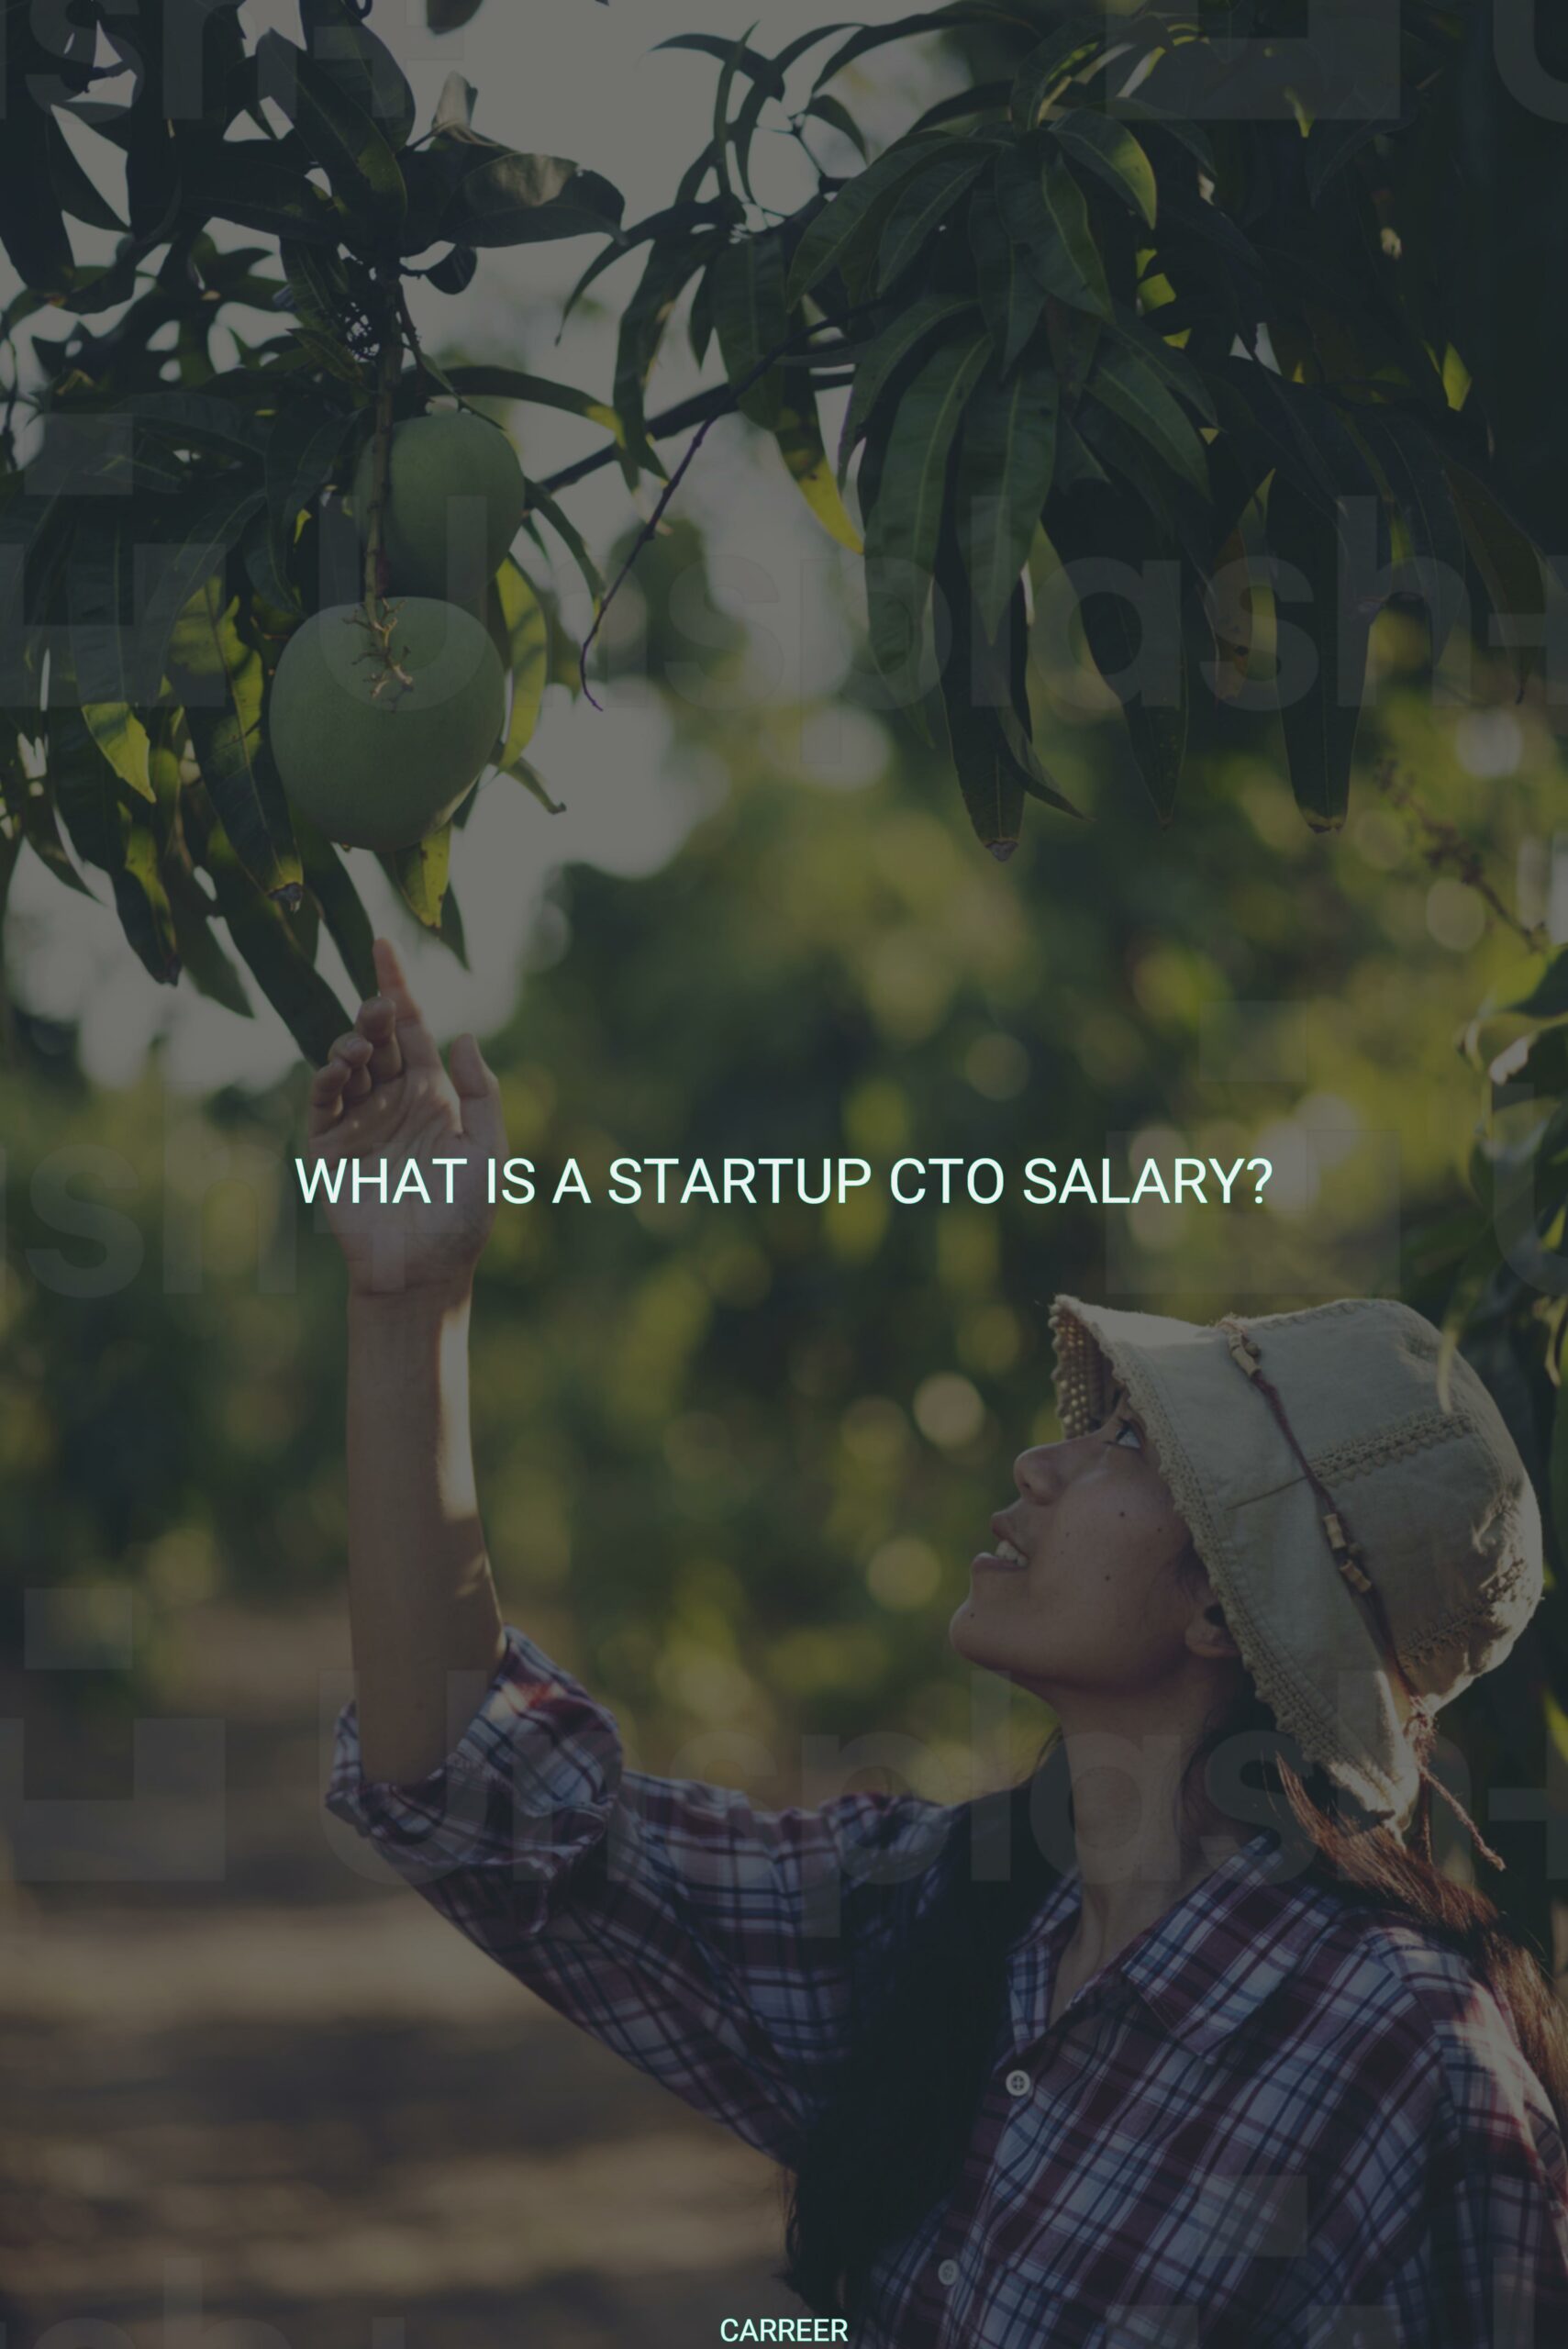 What is a startup cto salary?